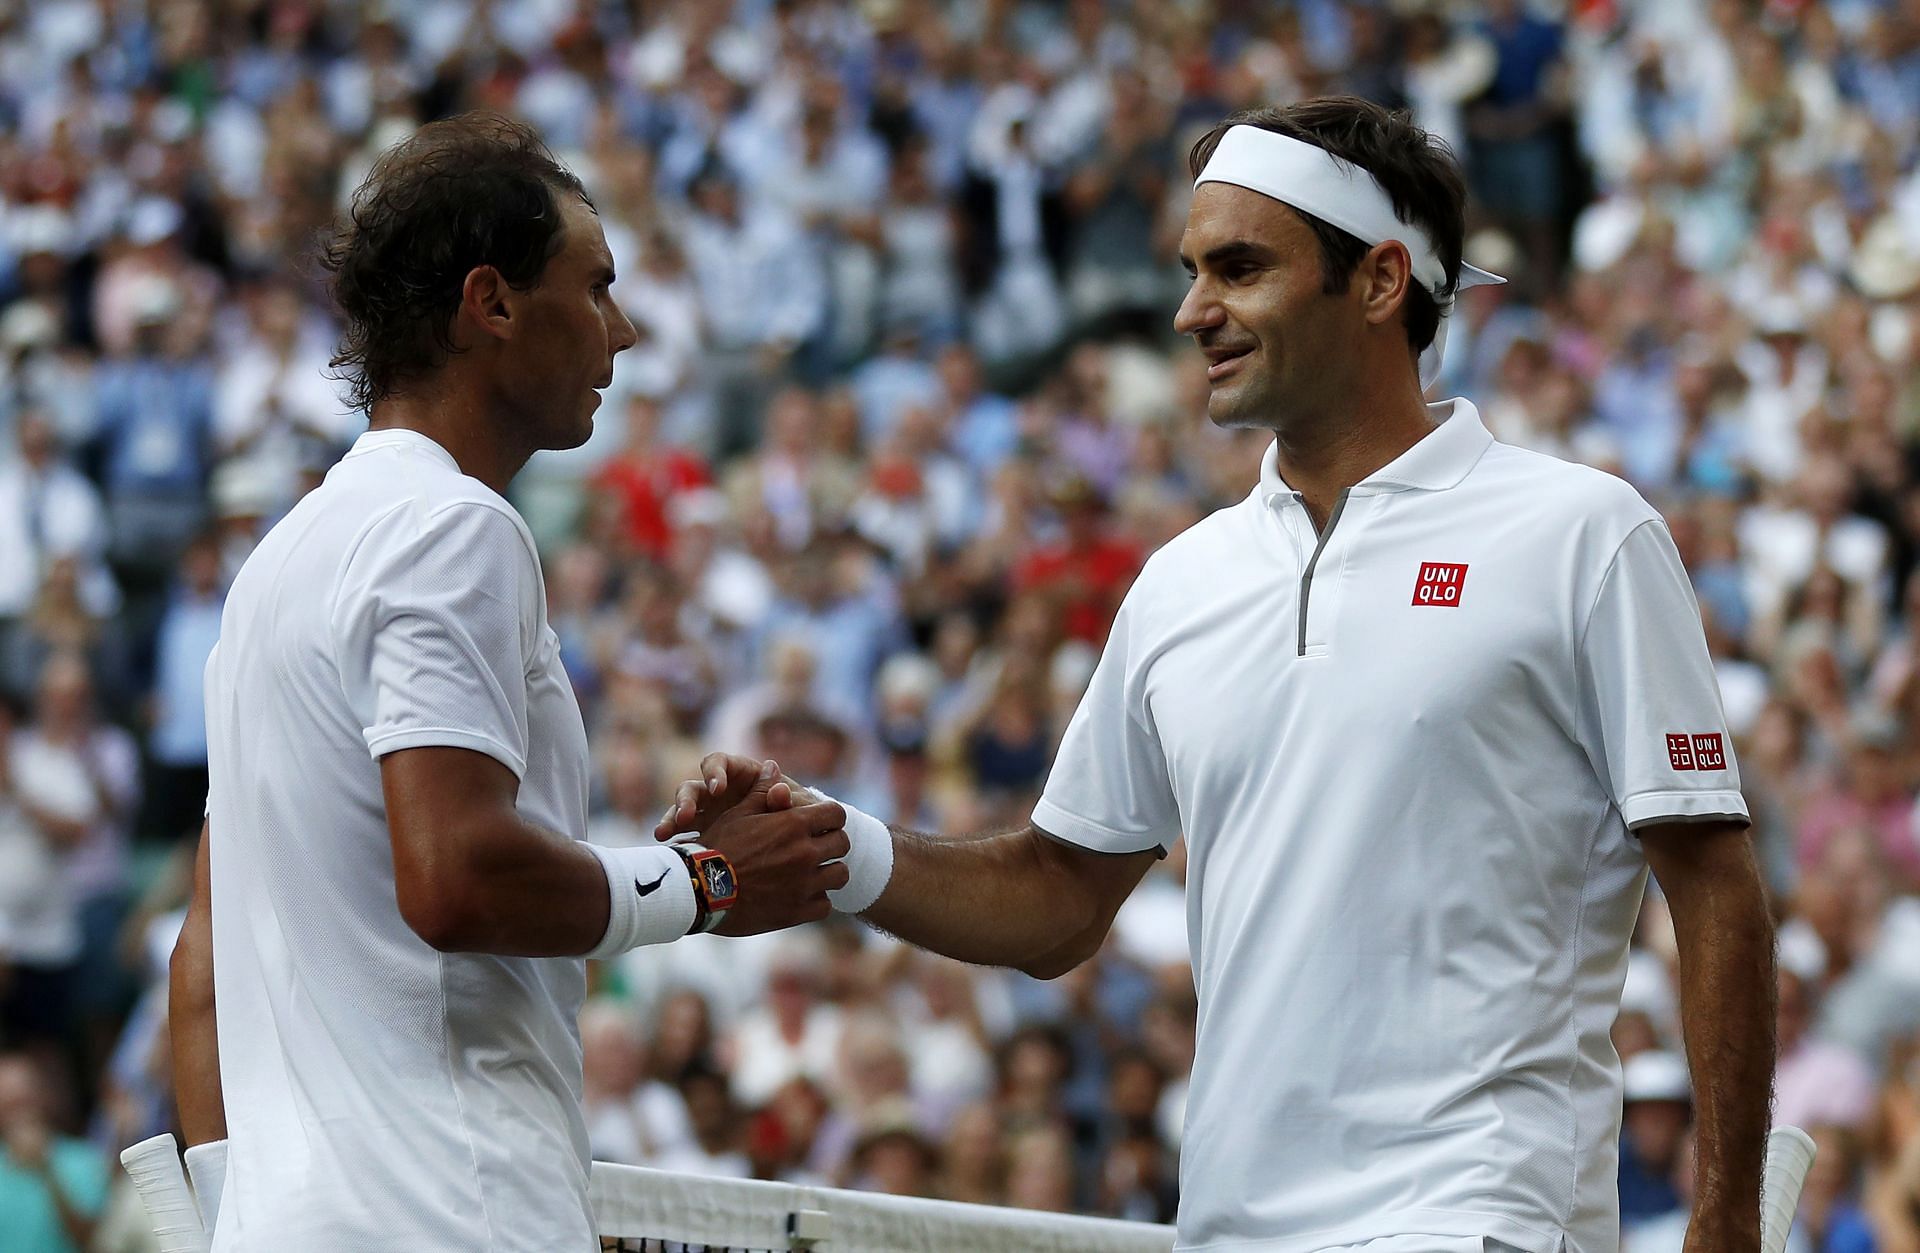 Rafael Nadal and Roger Federer at the Wimbledon Championships 2019